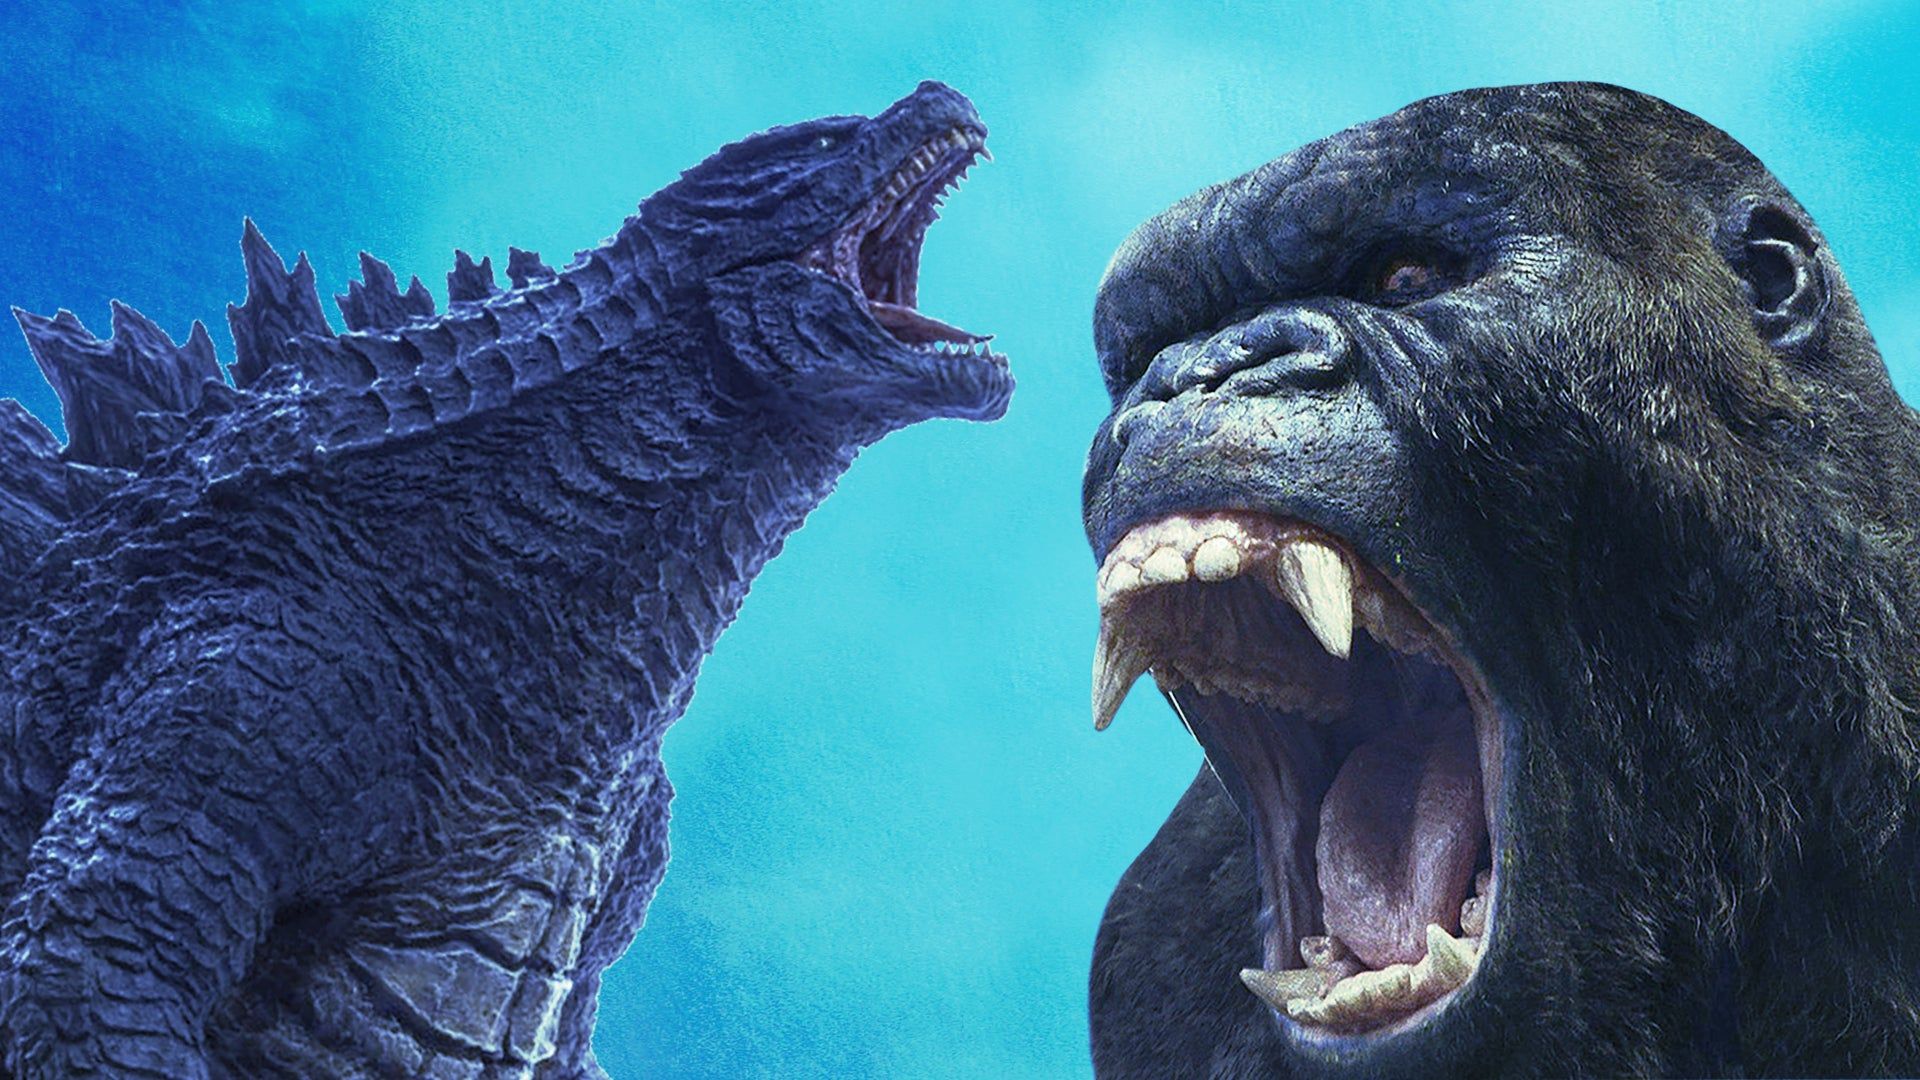 Godzilla vs Kong Release Date Delayed to Late 2020